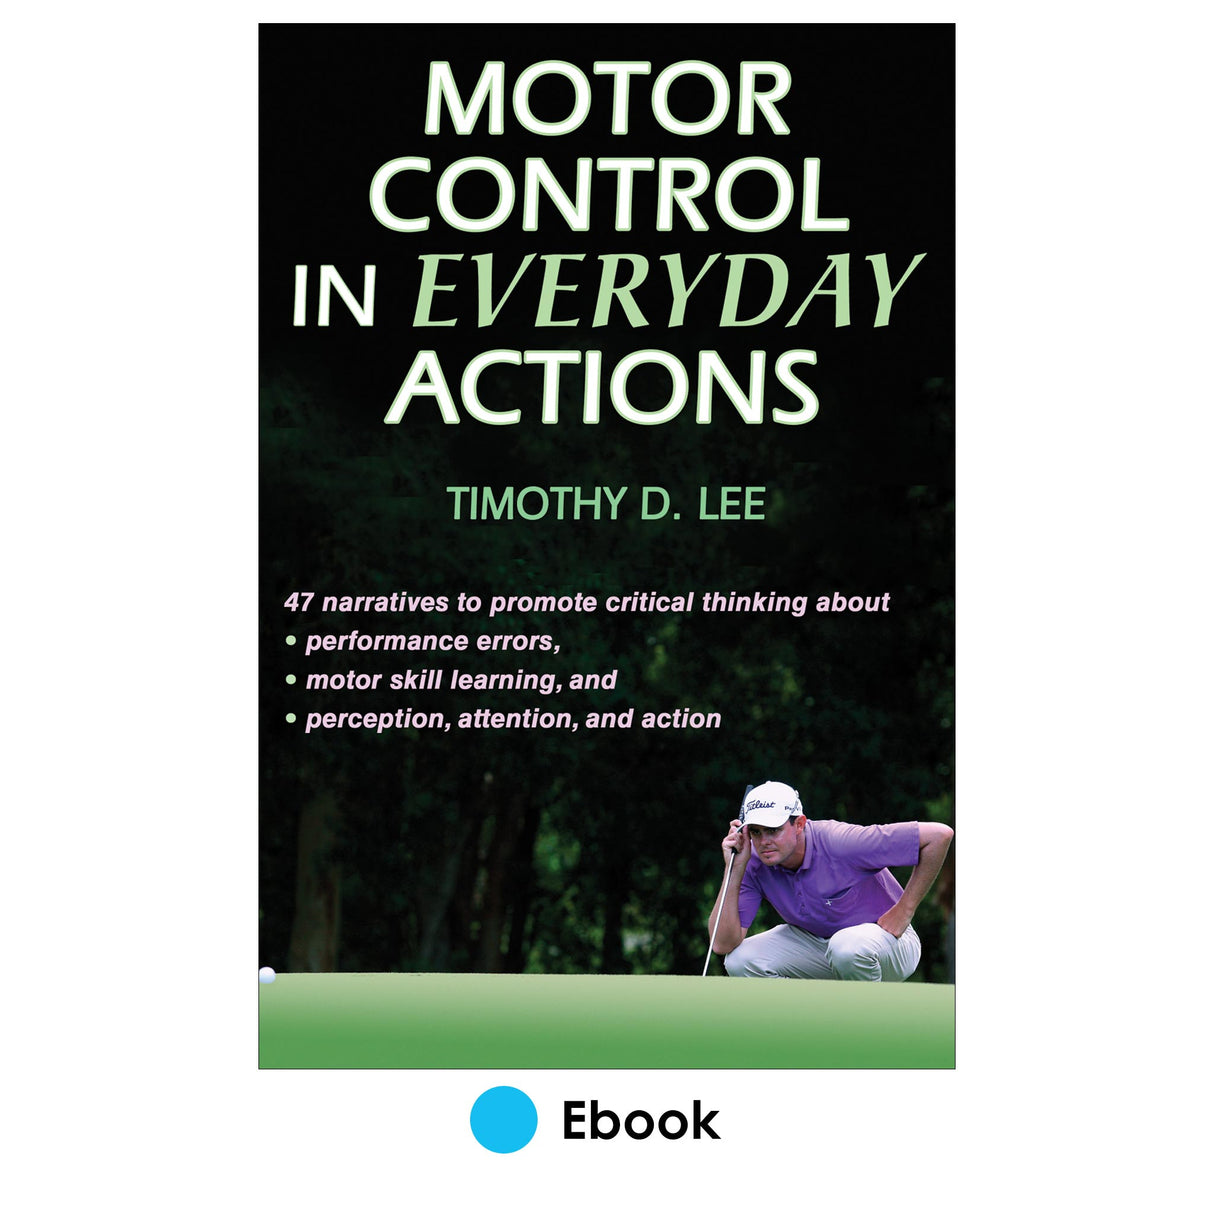 Motor Control in Everyday Actions PDF